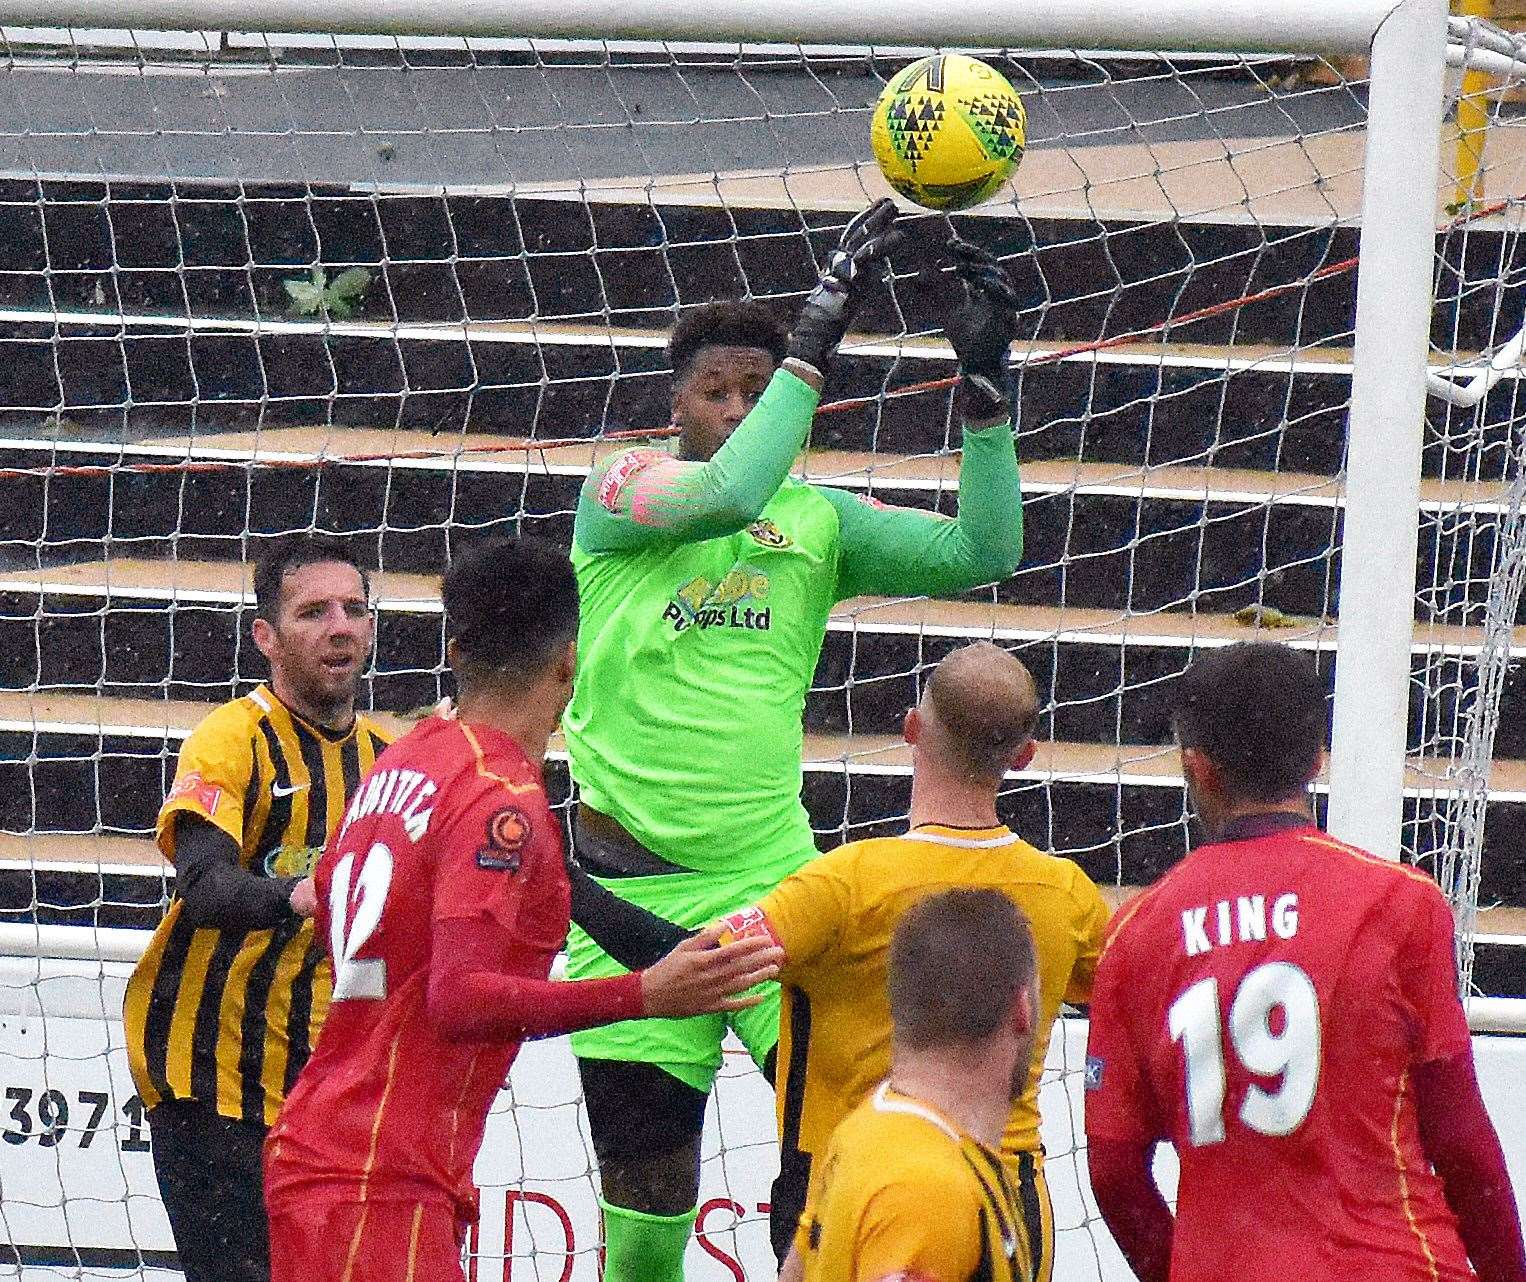 New Folkestone goalkeeper Alexis Andre Jr claims the ball on his debut in Invicta's 1-0 FA Cup win over Gloucester City. Picture: Randolph File